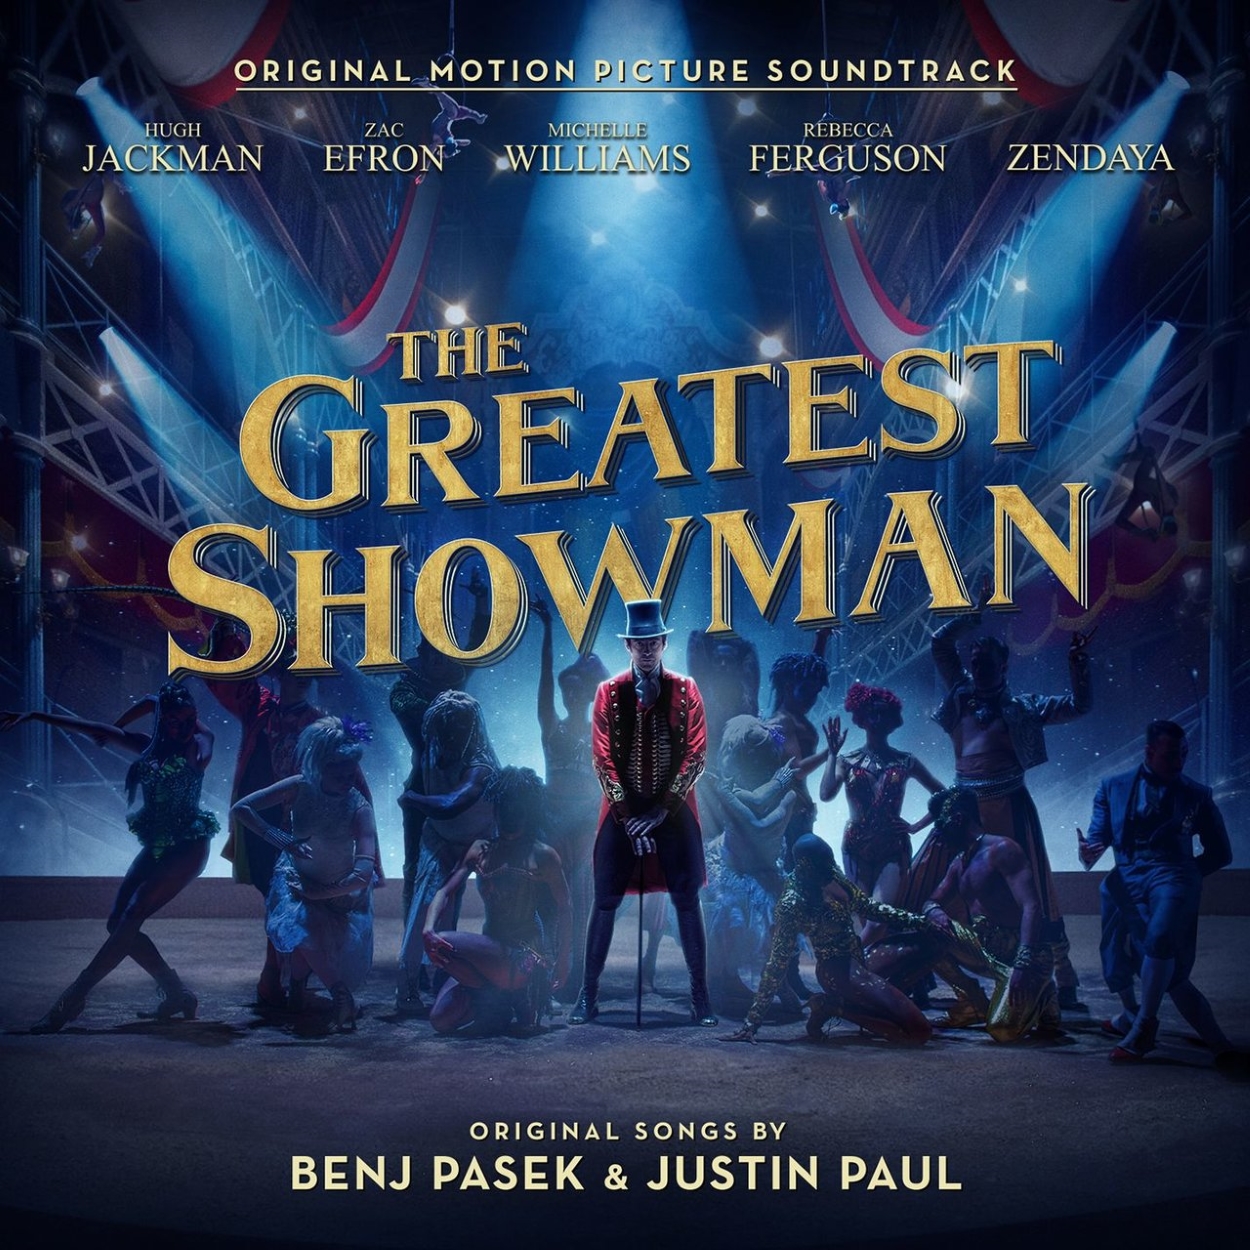 John Debney and Joseph Trapanese - The Greatest Showman (OST)